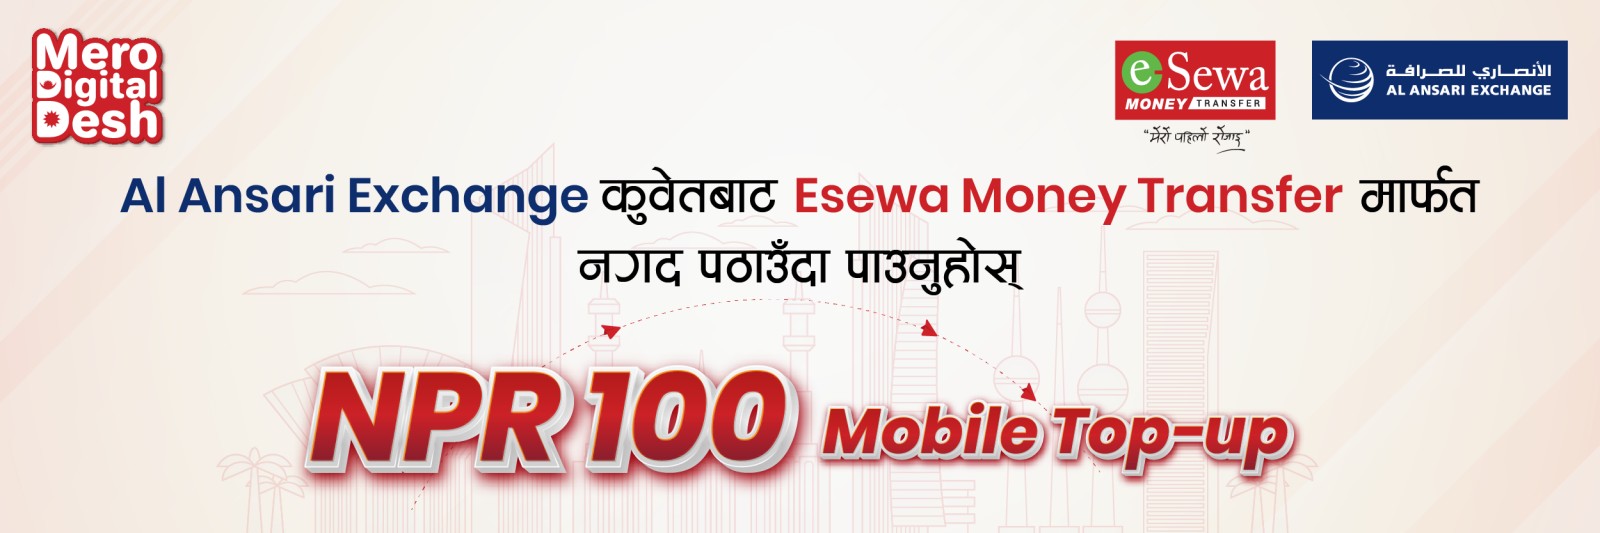 Enjoy Rs. 100 Mobile Top-up with Esewa Money Transfer and Al Ansari Exchange ! - Banner Image